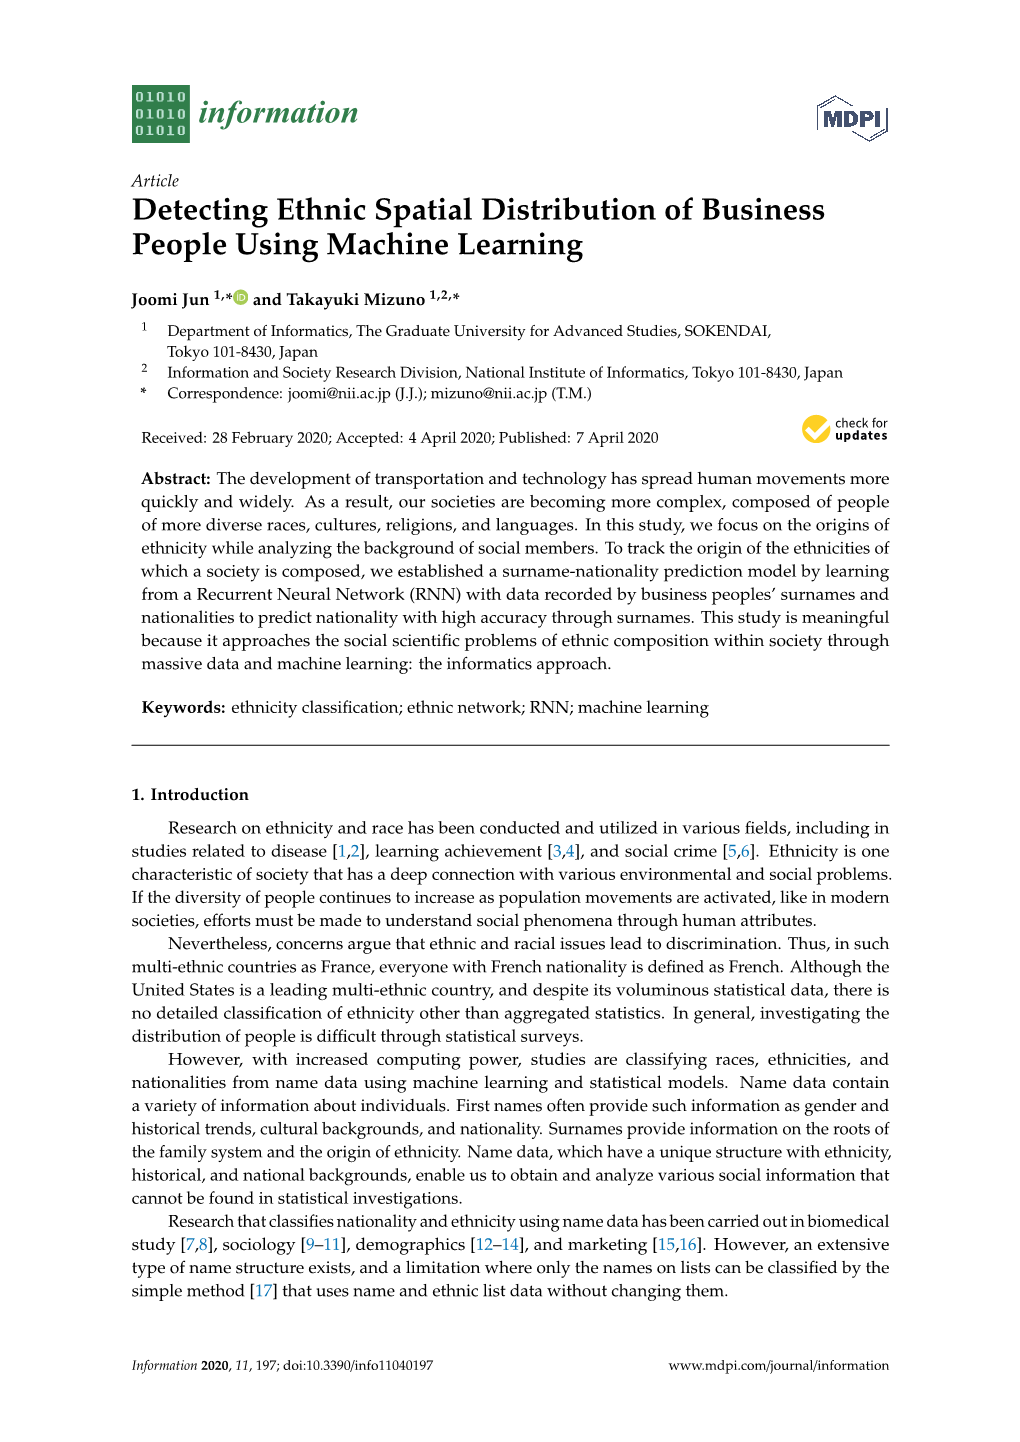 Detecting Ethnic Spatial Distribution of Business People Using Machine Learning